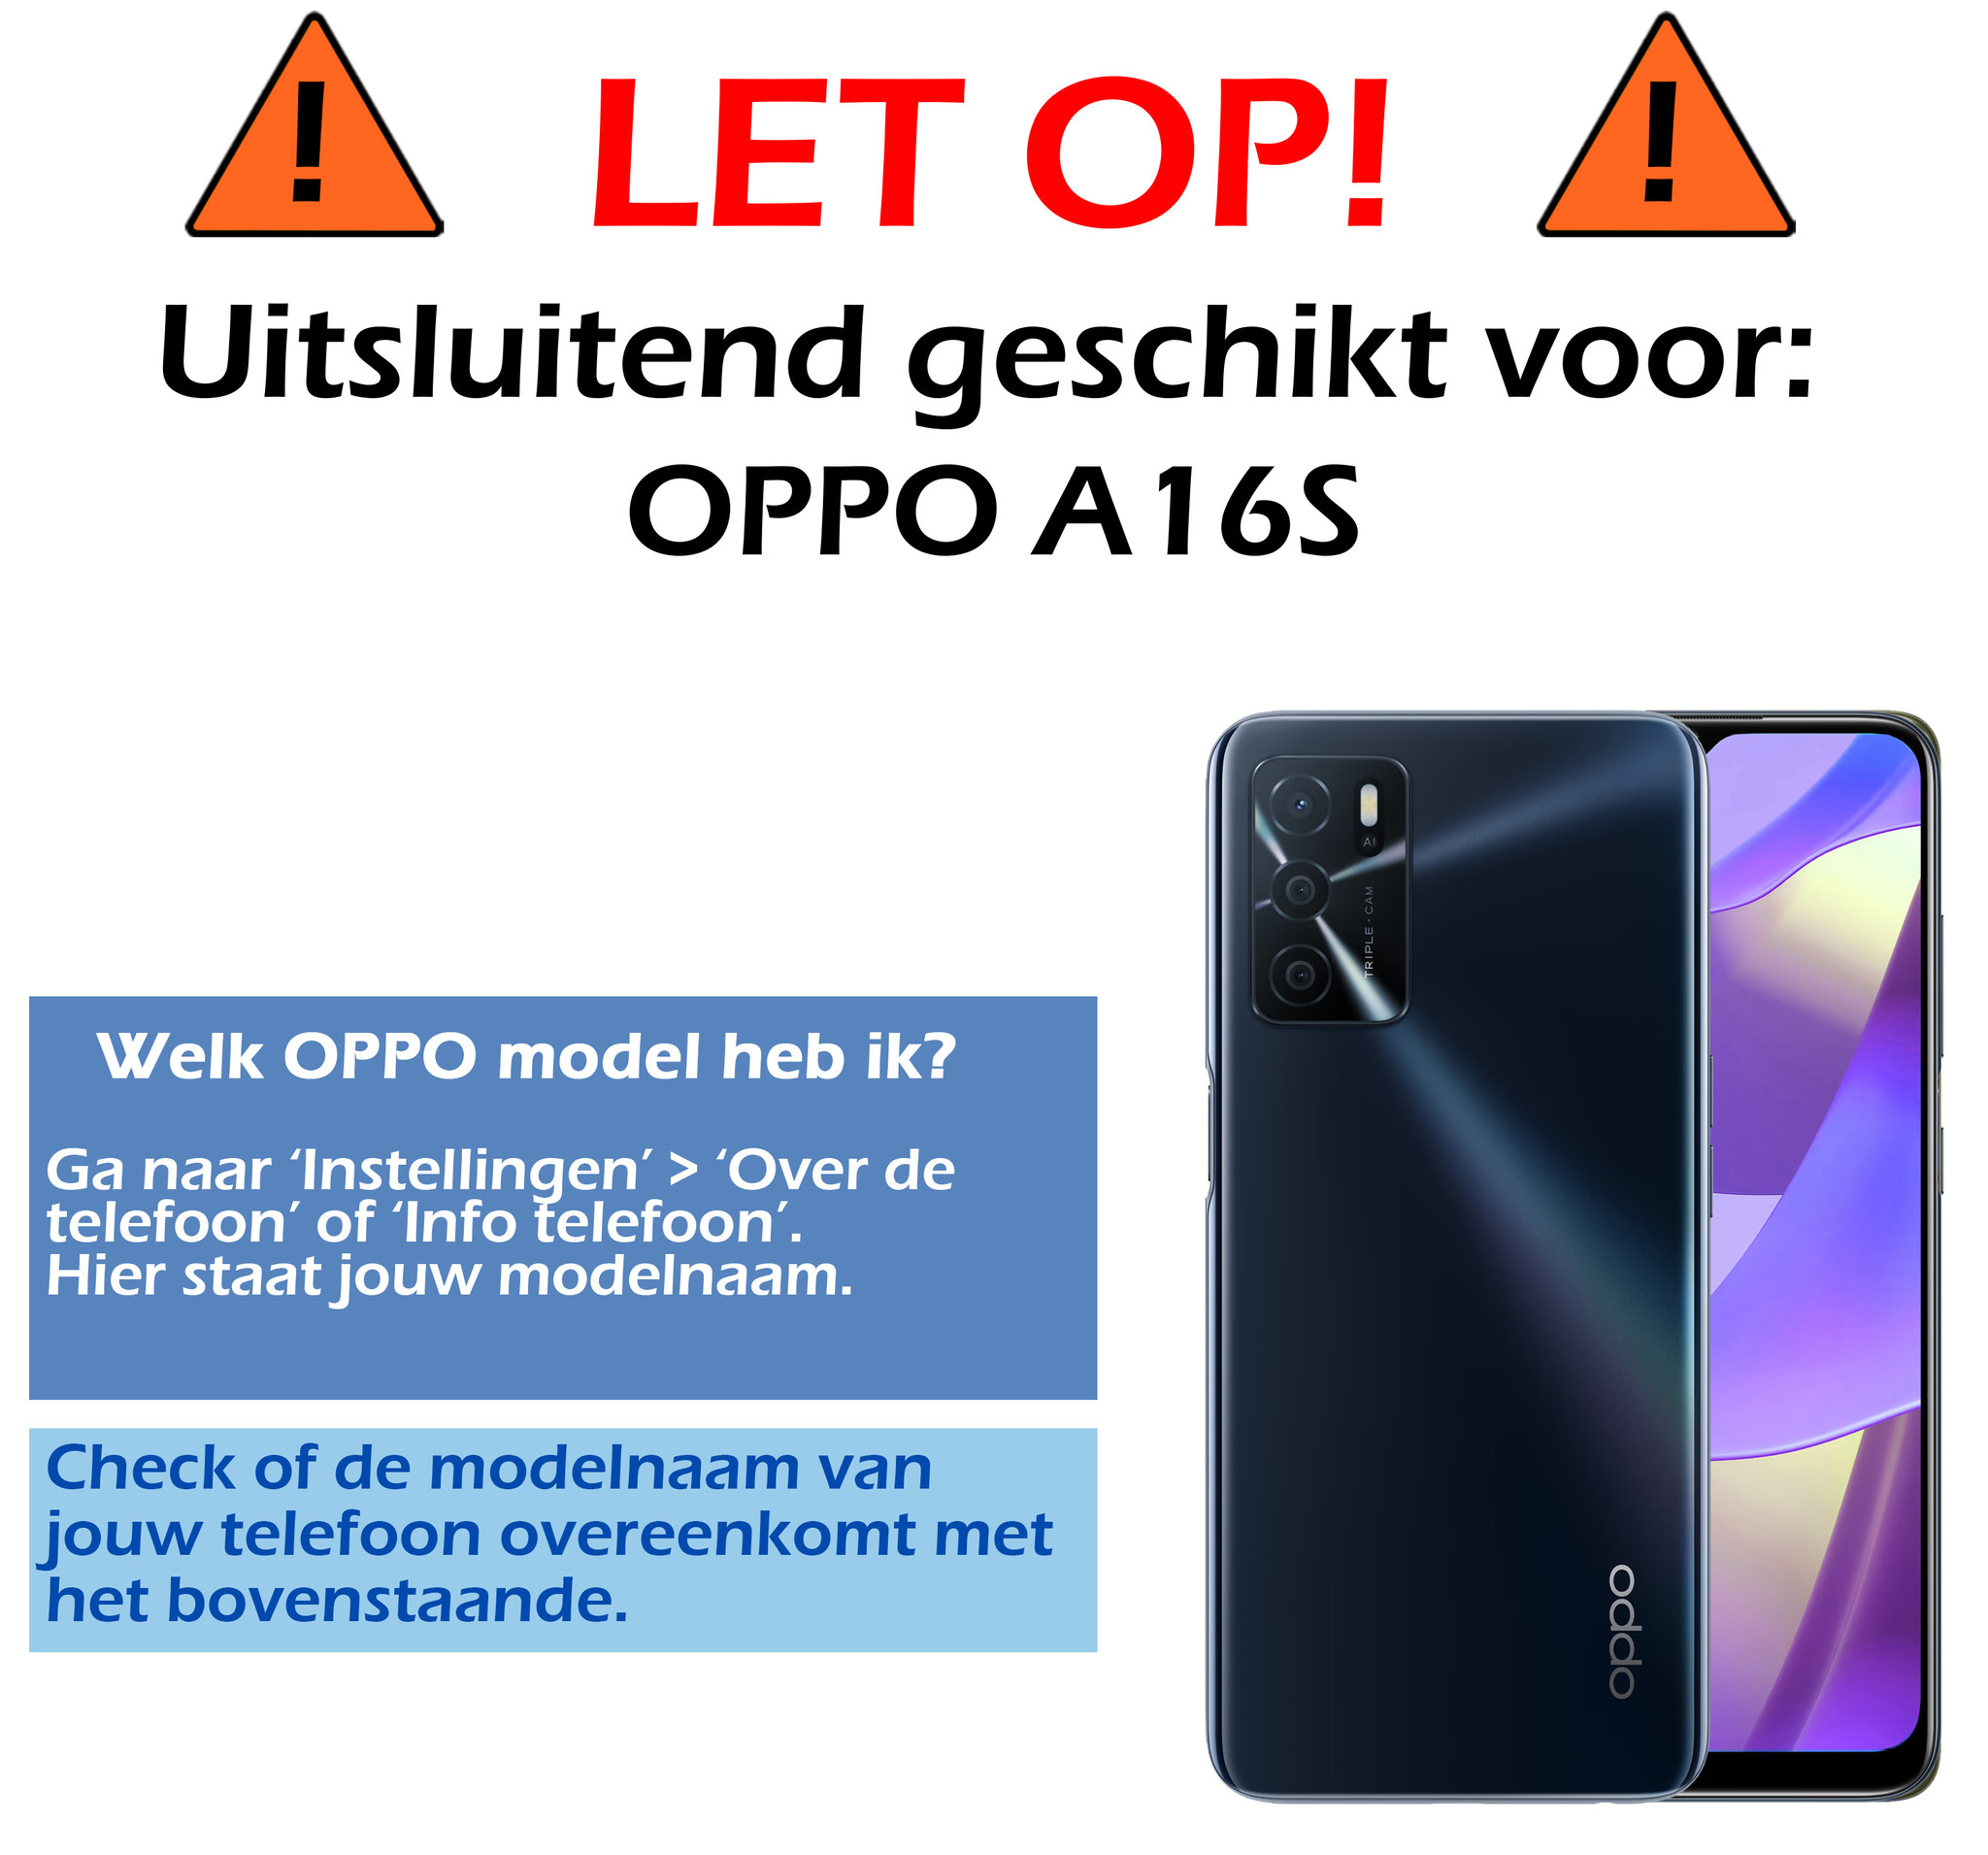 Nomfy OPPO A16s Hoesje Bookcase Met 2x Screenprotector - OPPO A16s Screenprotector 2x - OPPO A16s Book Case Met 2x Screenprotector Bruin